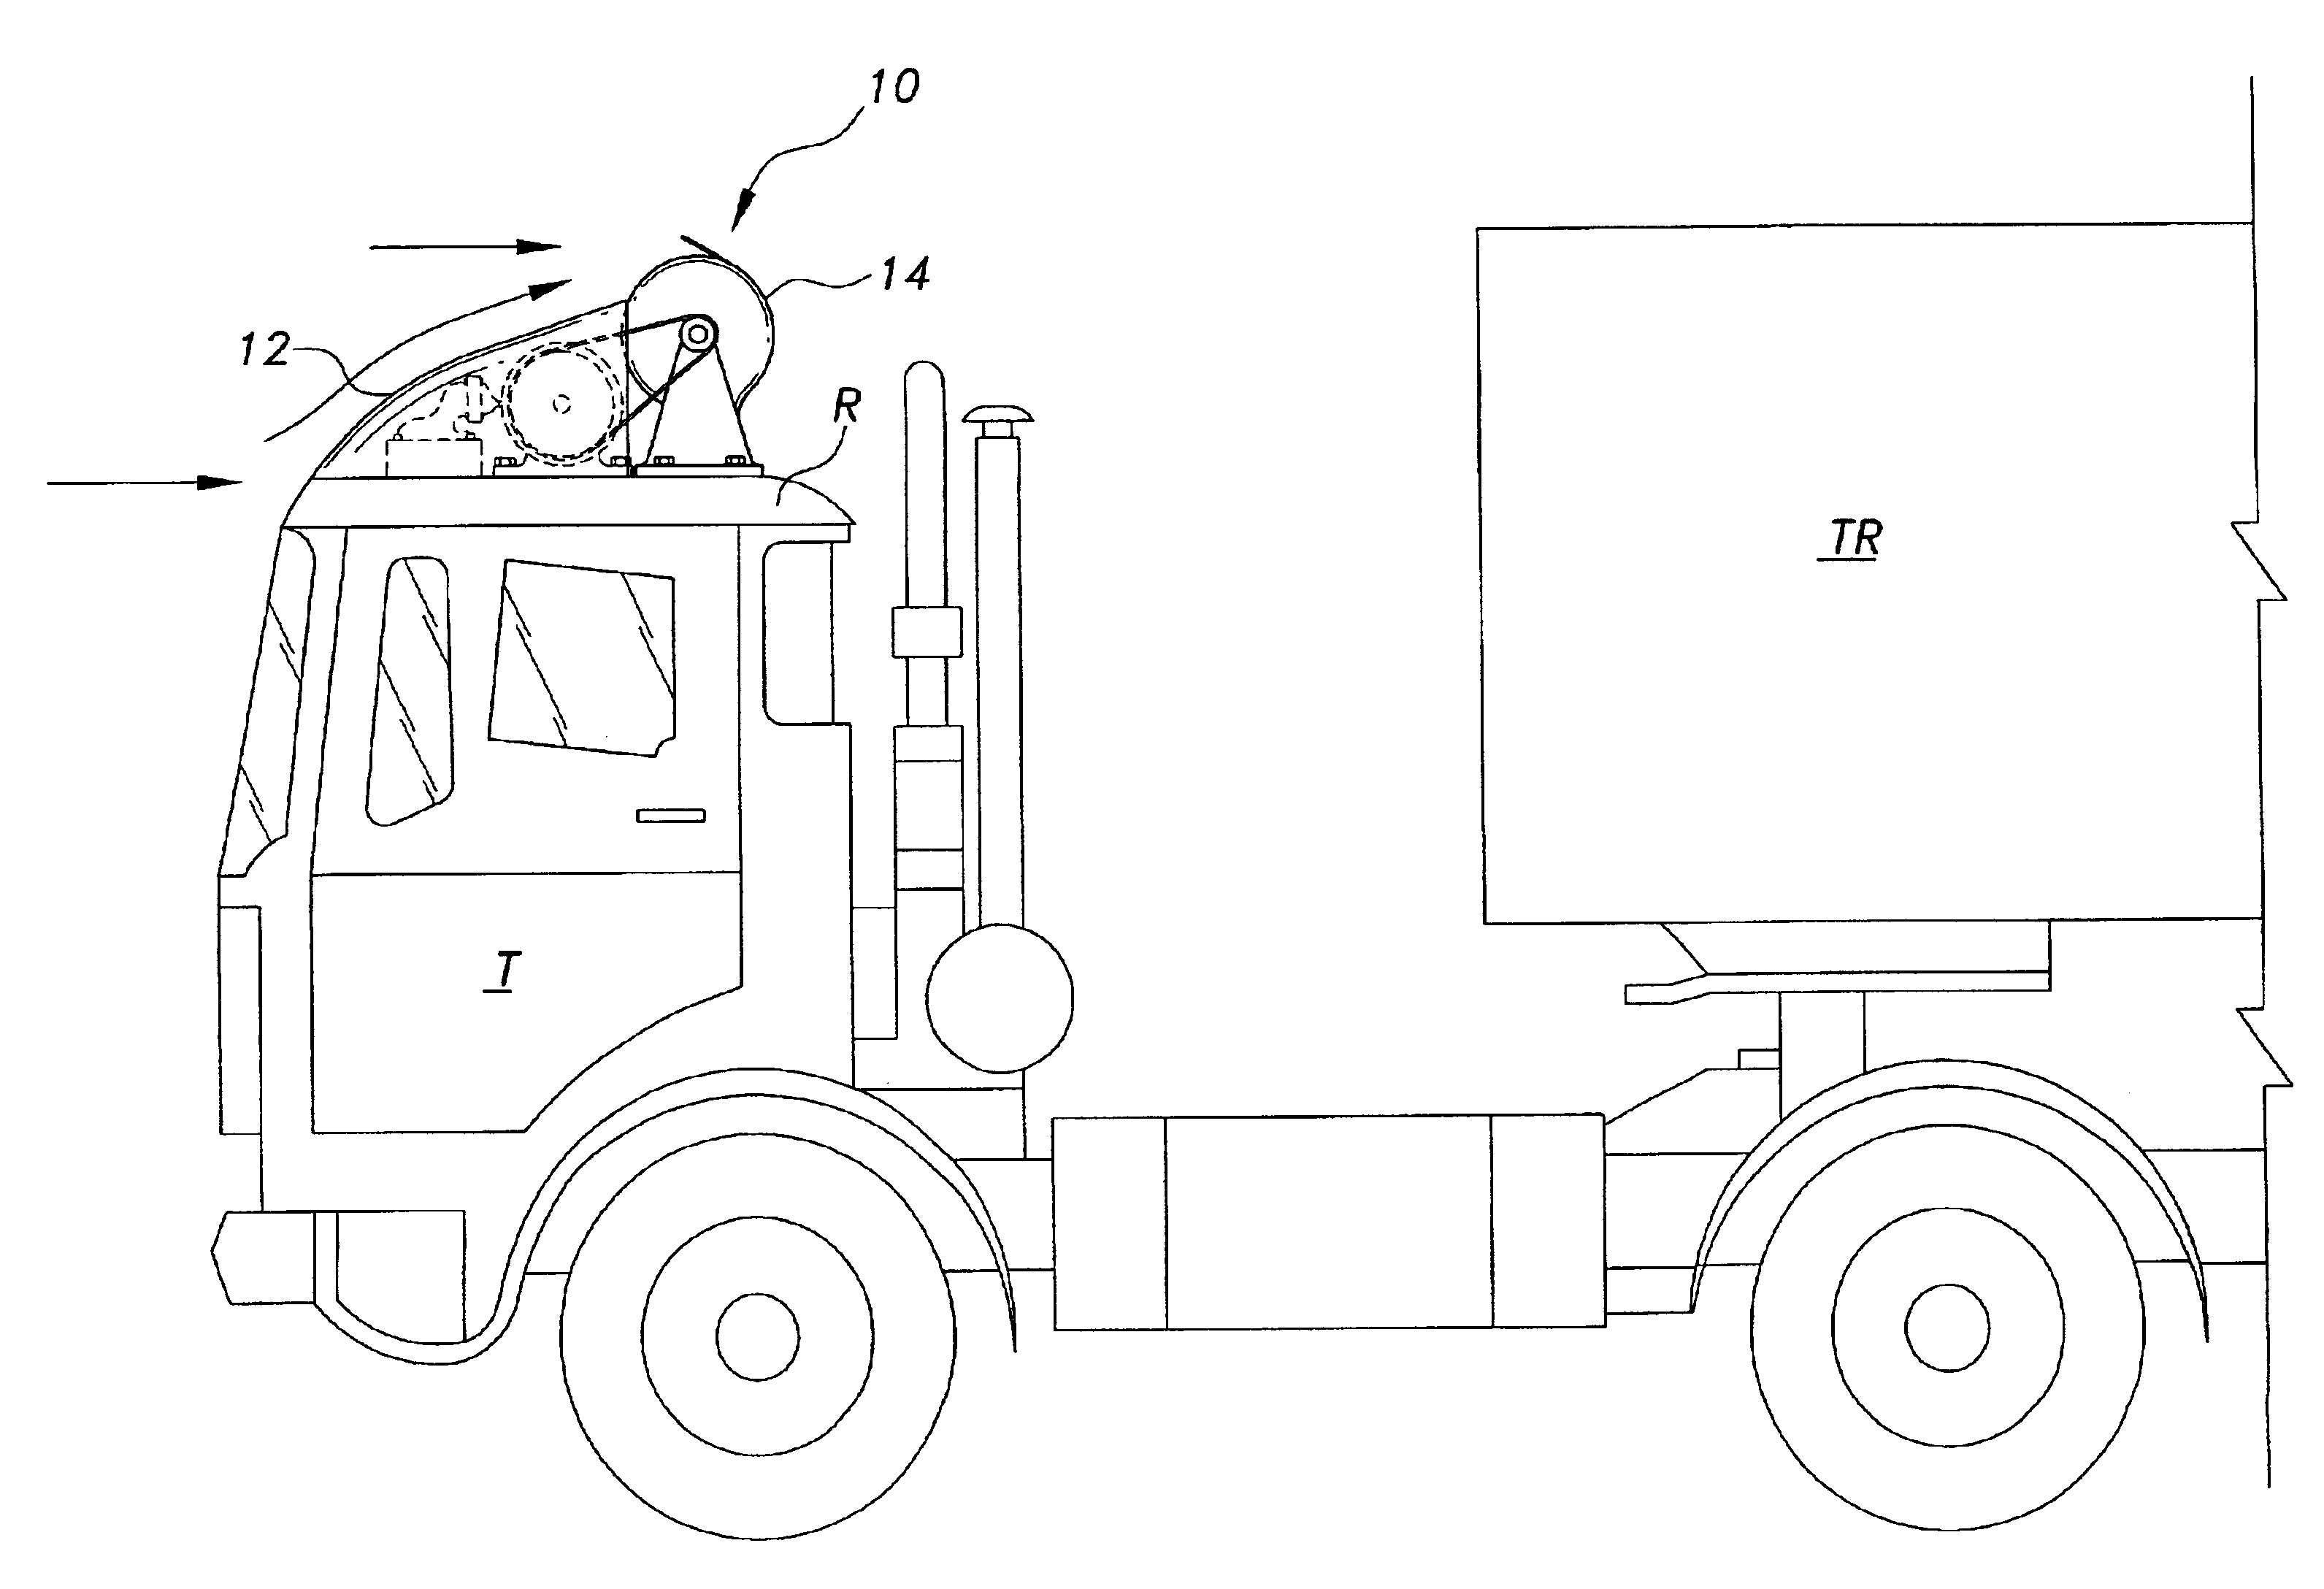 Wind energy capturing device for moving vehicles